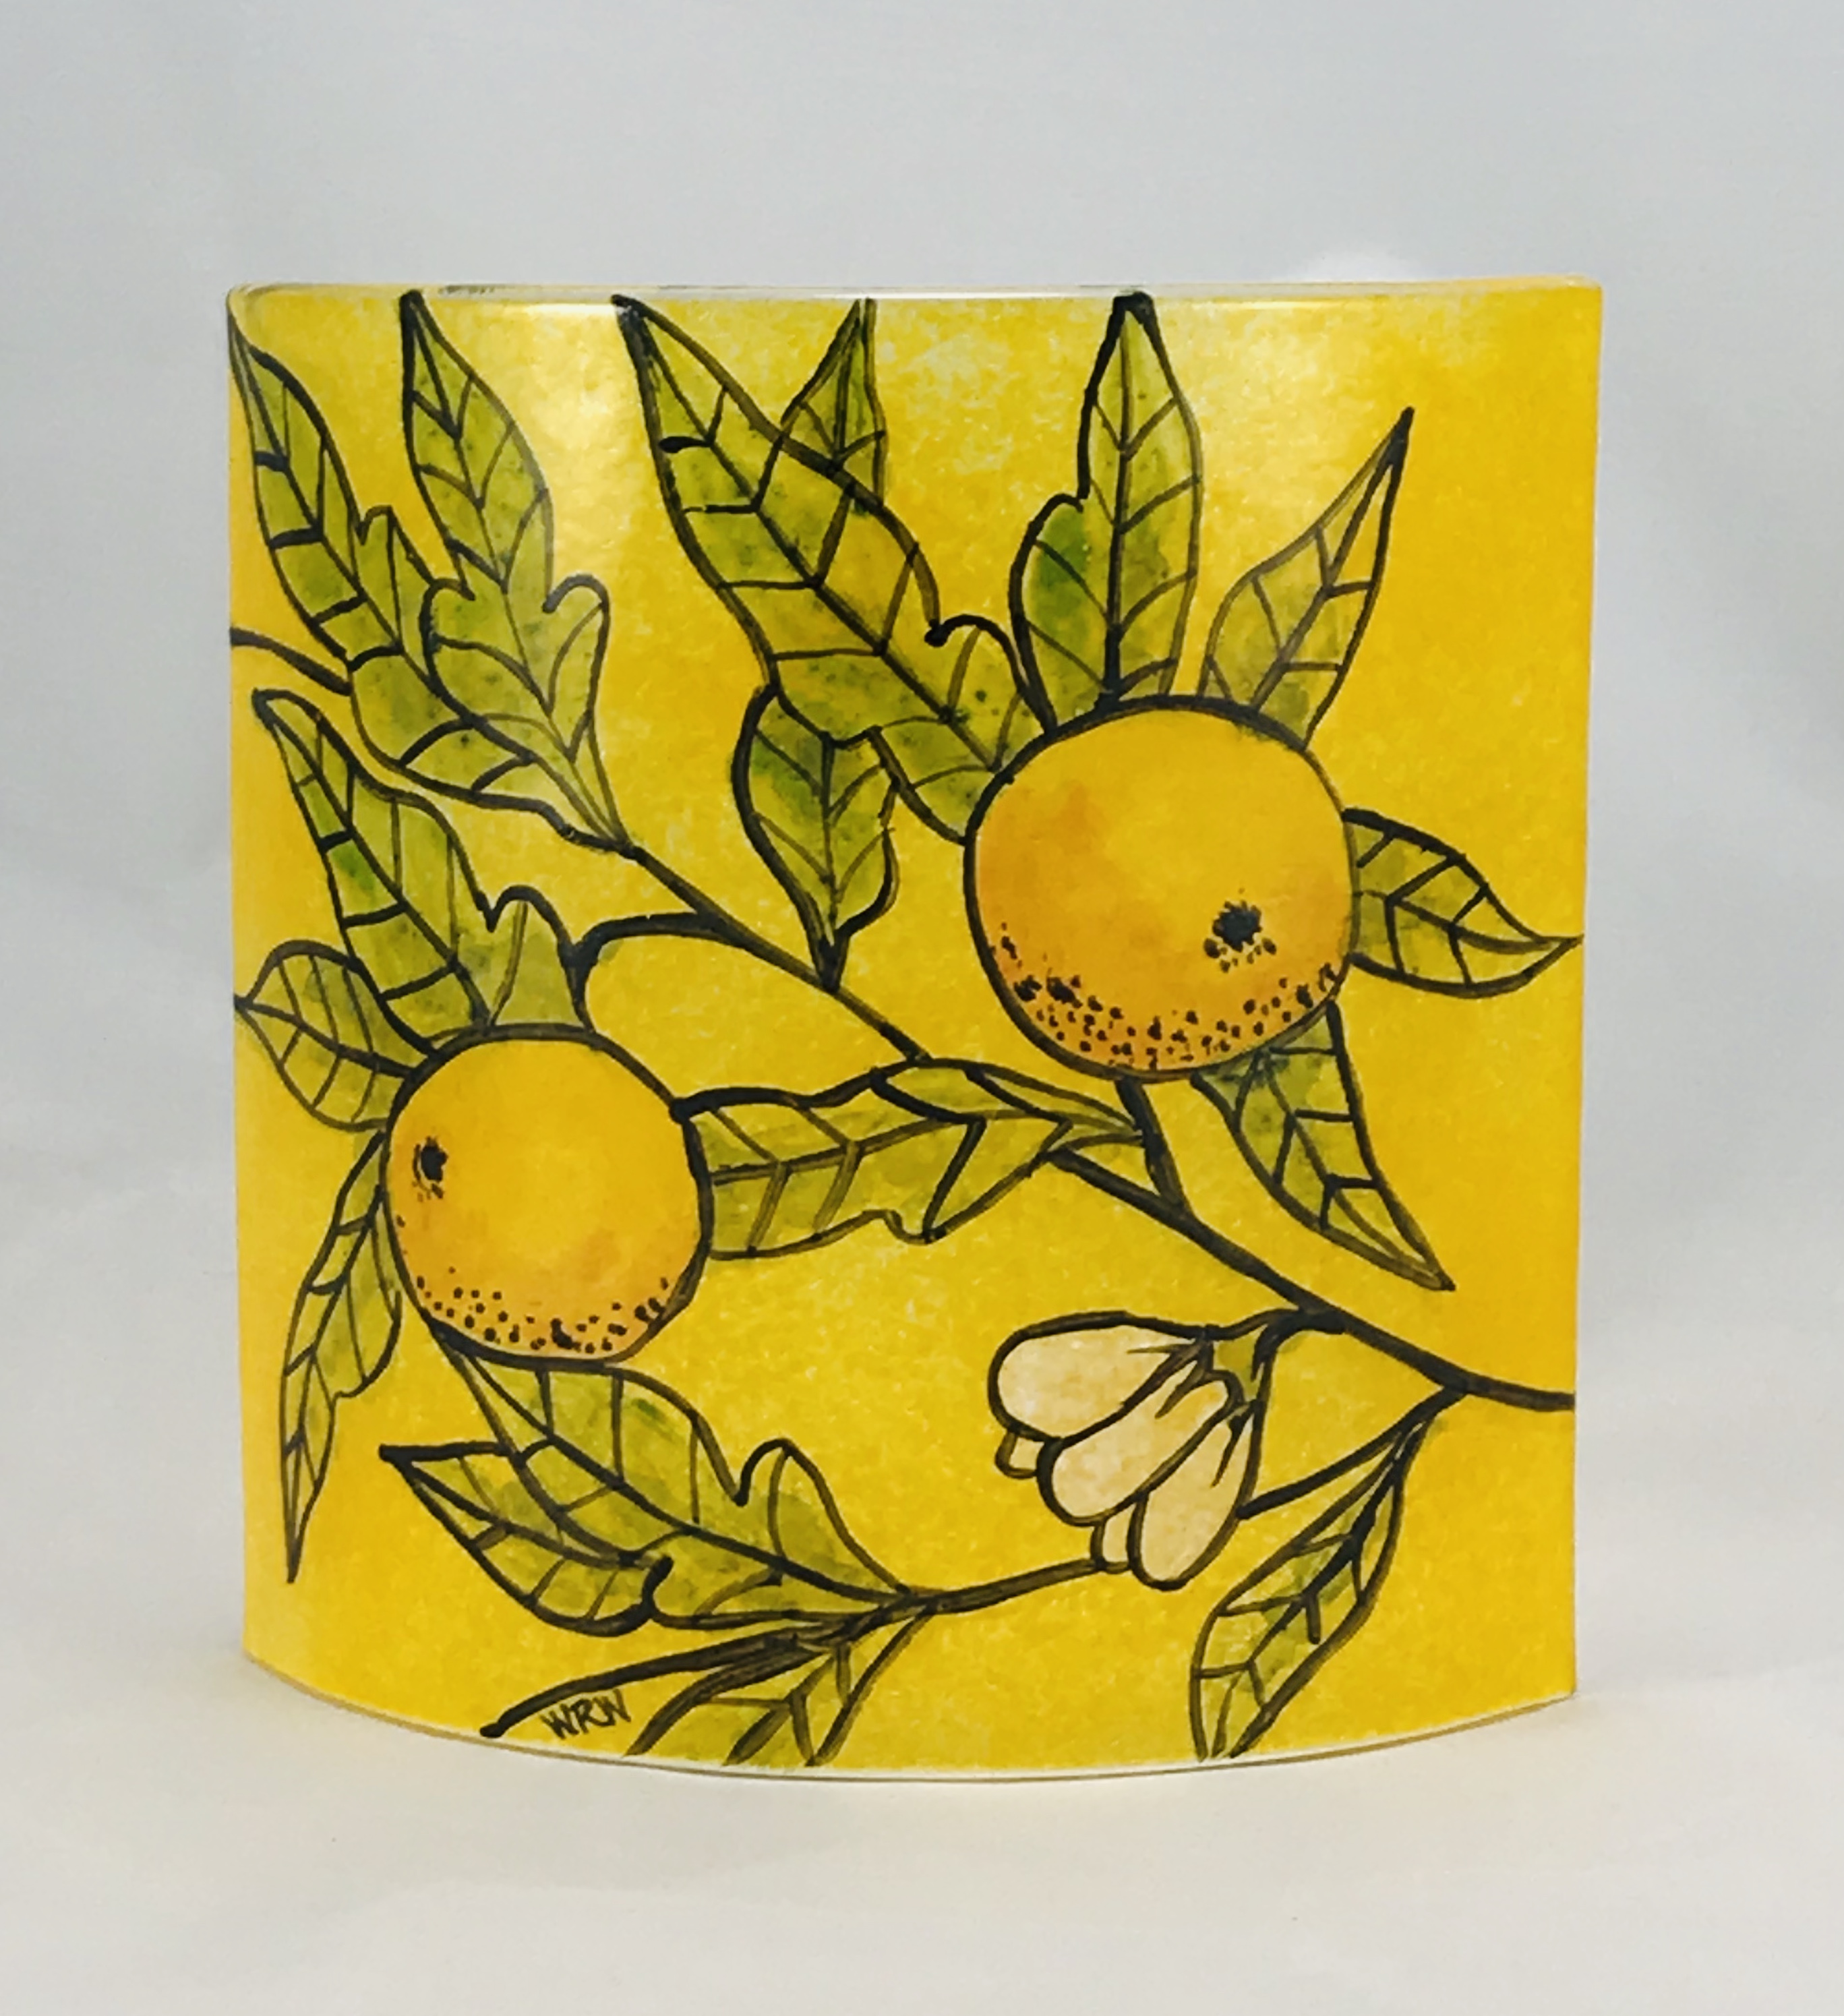 Fused glass curved panel of oranges and foliage